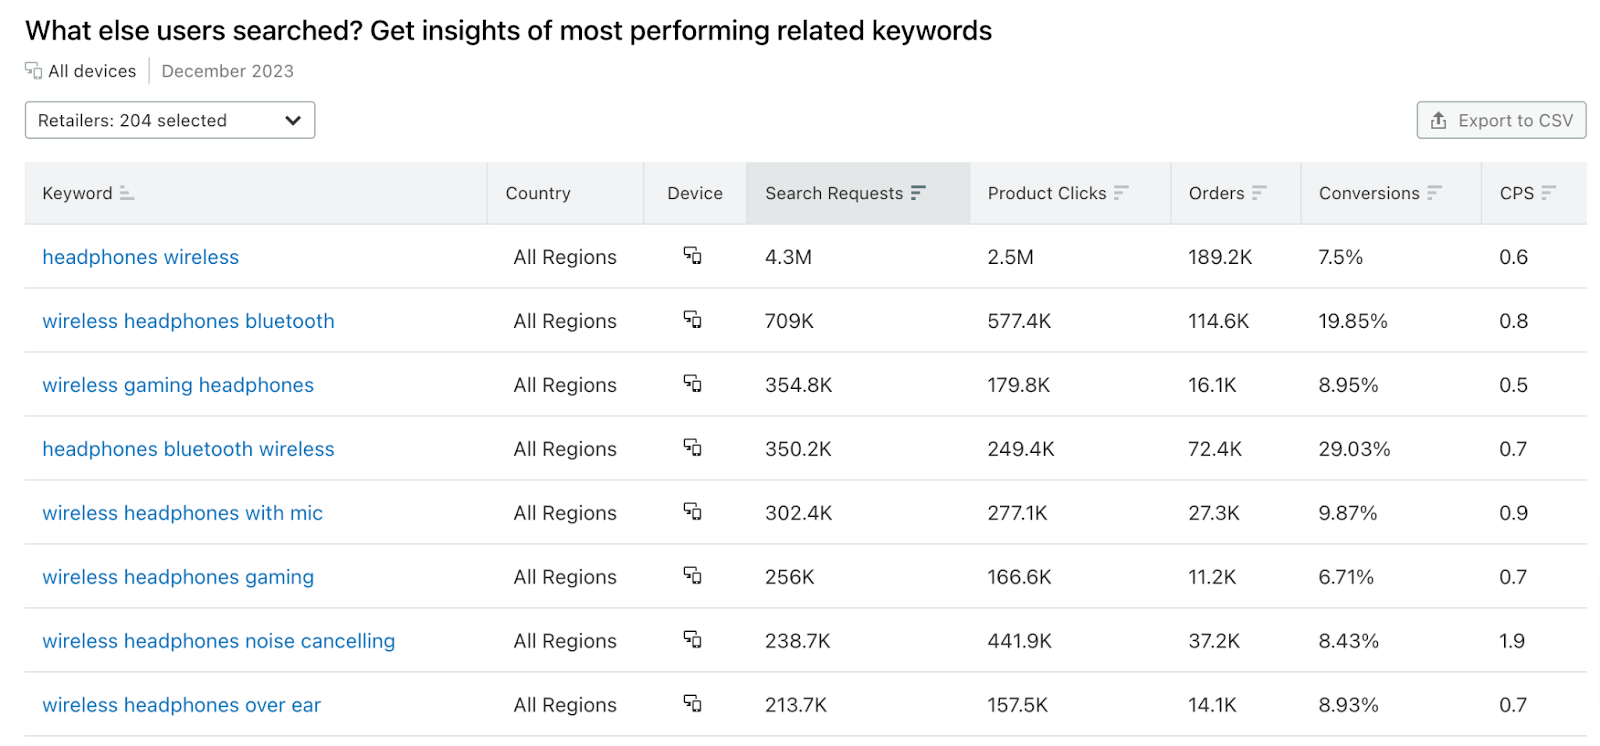 A full list of related keywords to "wireless headphones" in Online Retail Keyword Analytics app